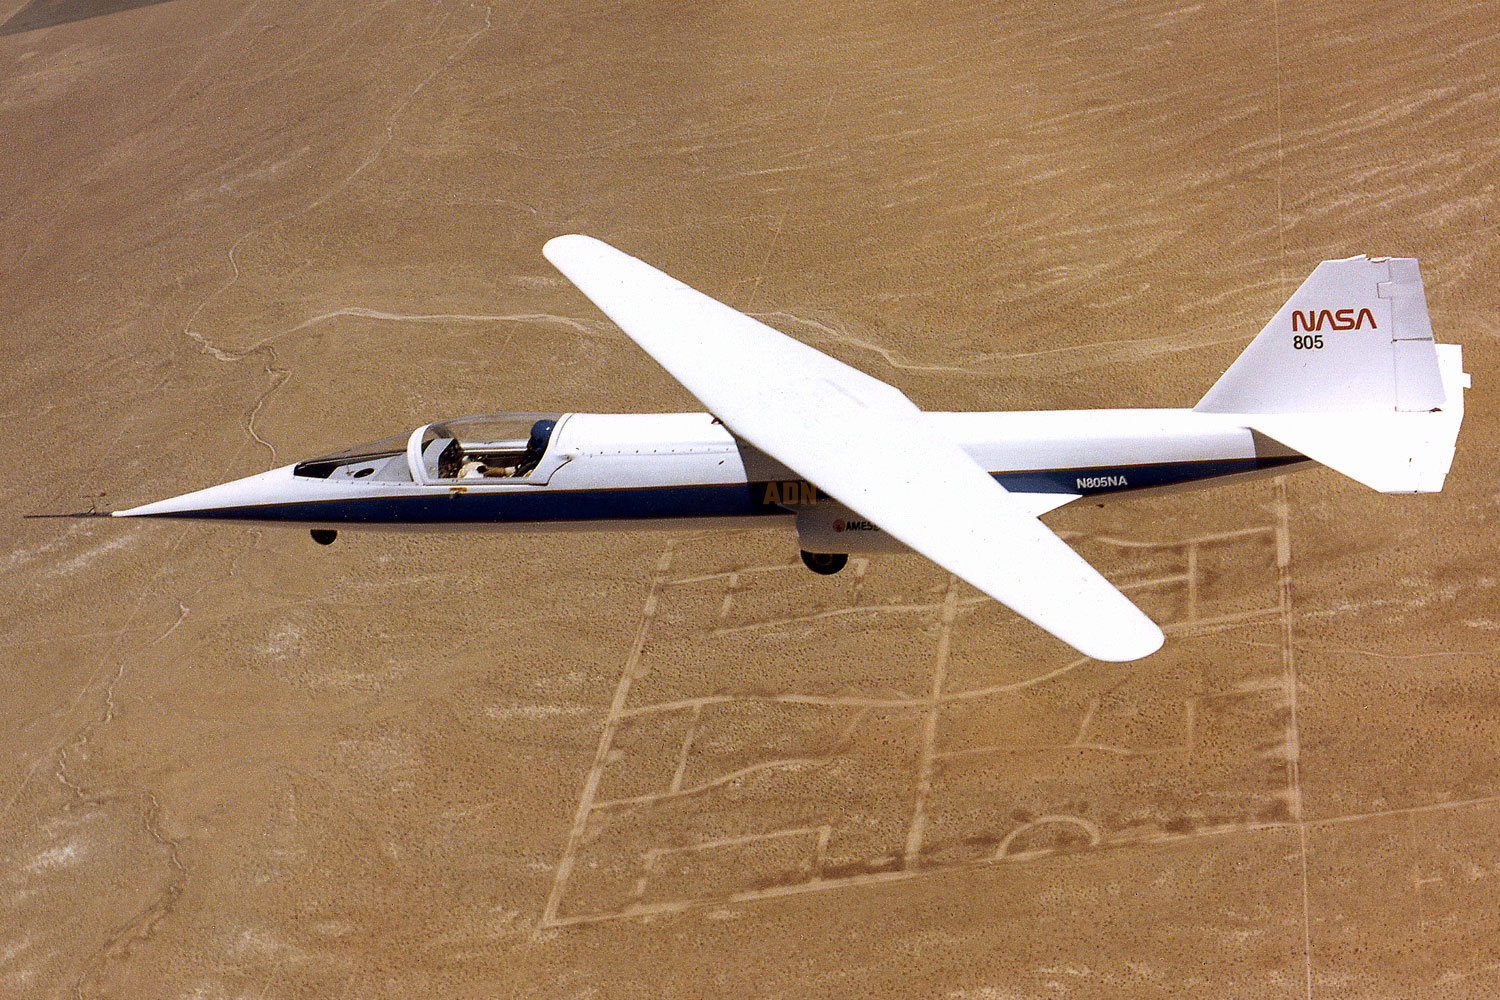 The AD-1 test aircraft flew 79 times between 1979 ans 1982